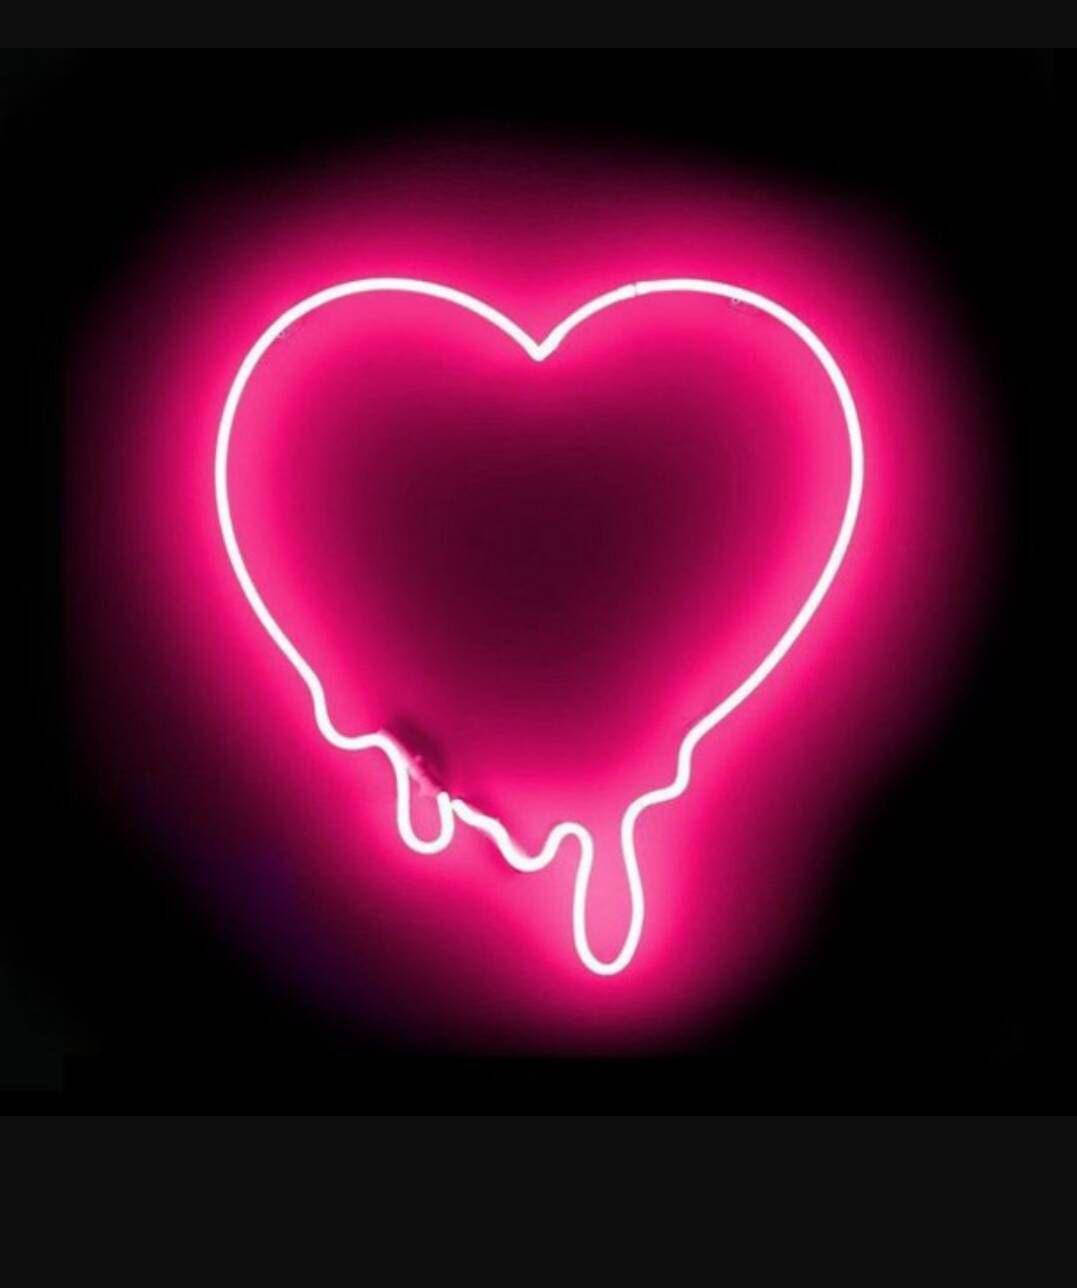 Dripping Pink Heart Aesthetic Wallpaper